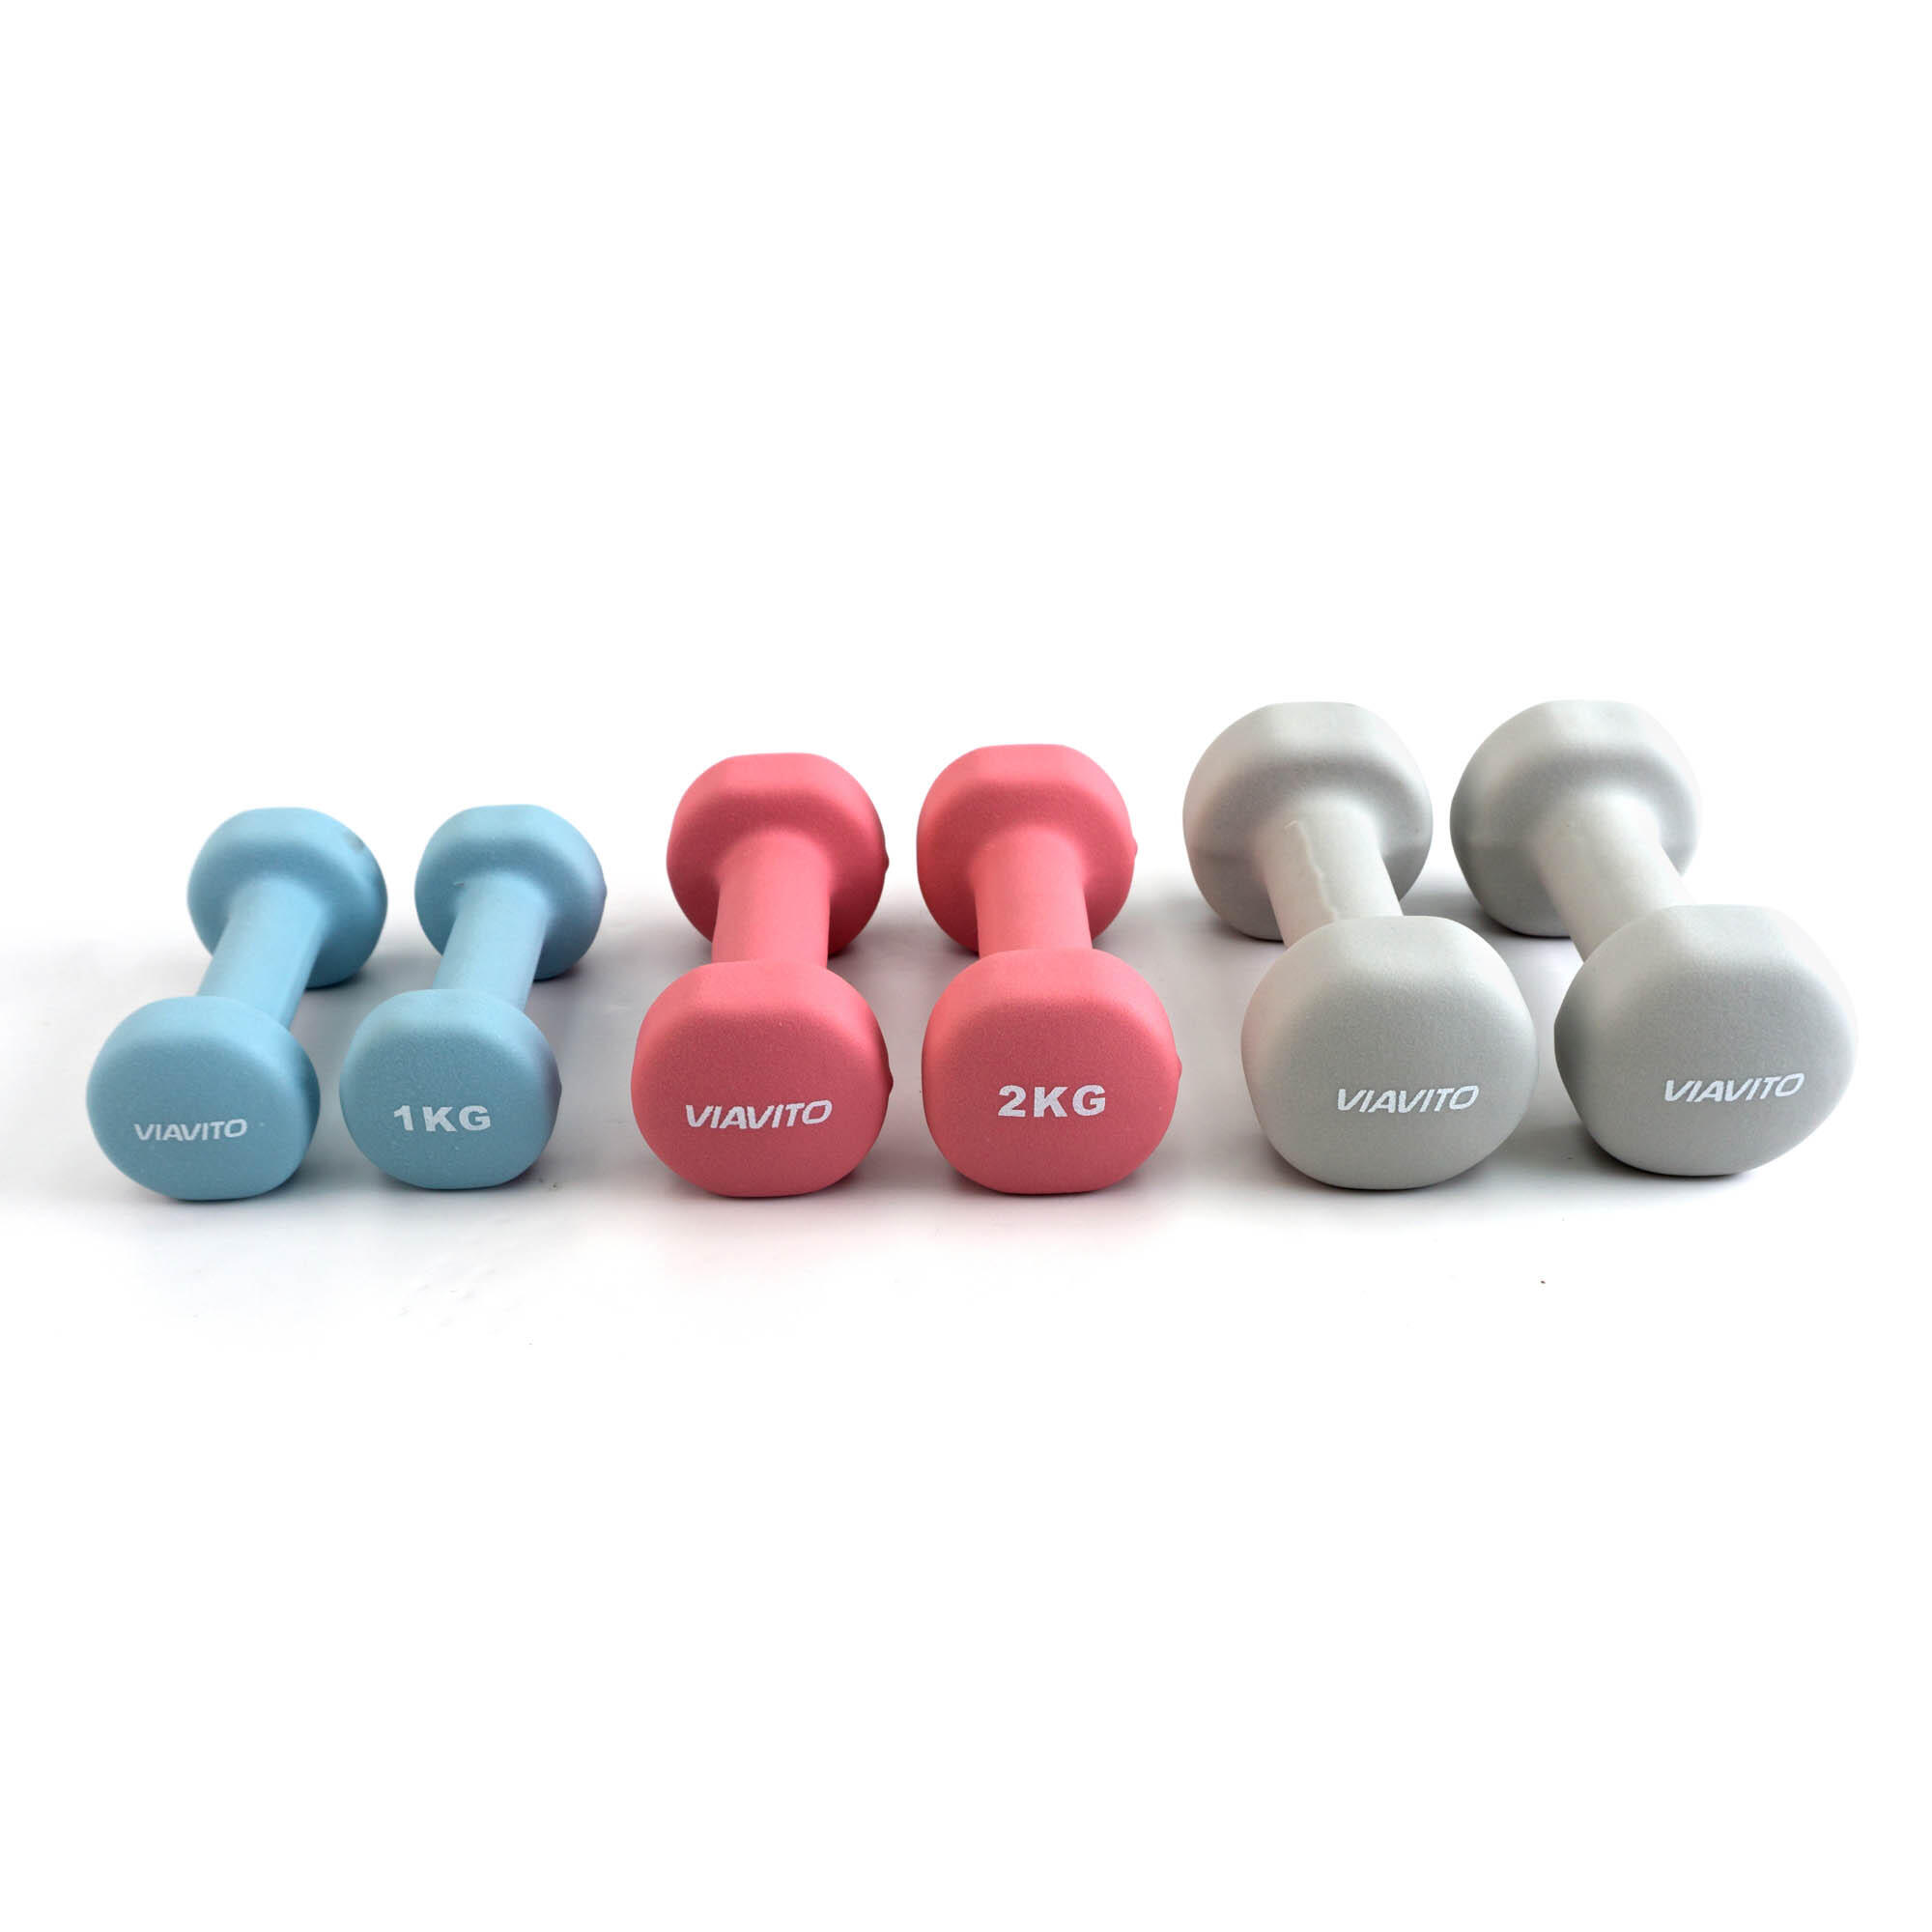 Viavito 12kg Dumbbell Weights Set with Stand 3/6